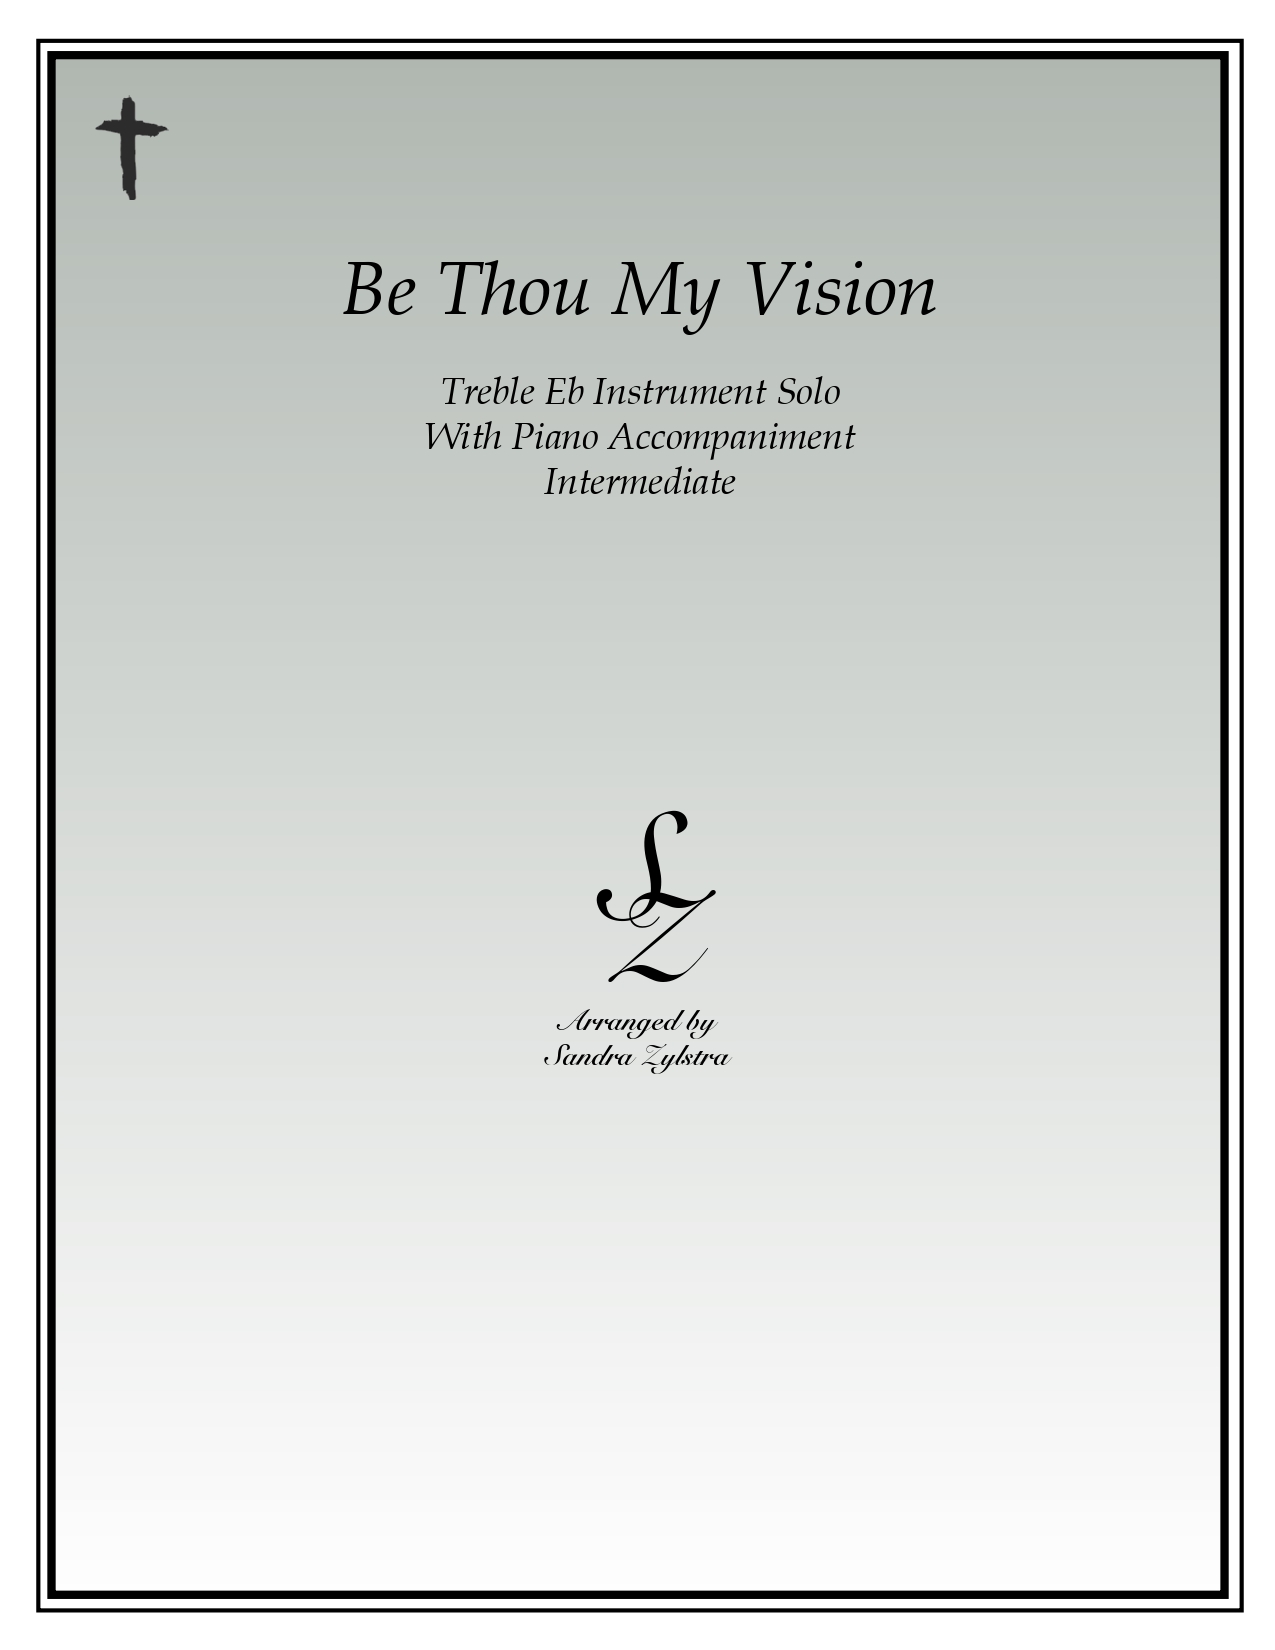 Be Thou My Vision Eb instrument solo part cover page 00011